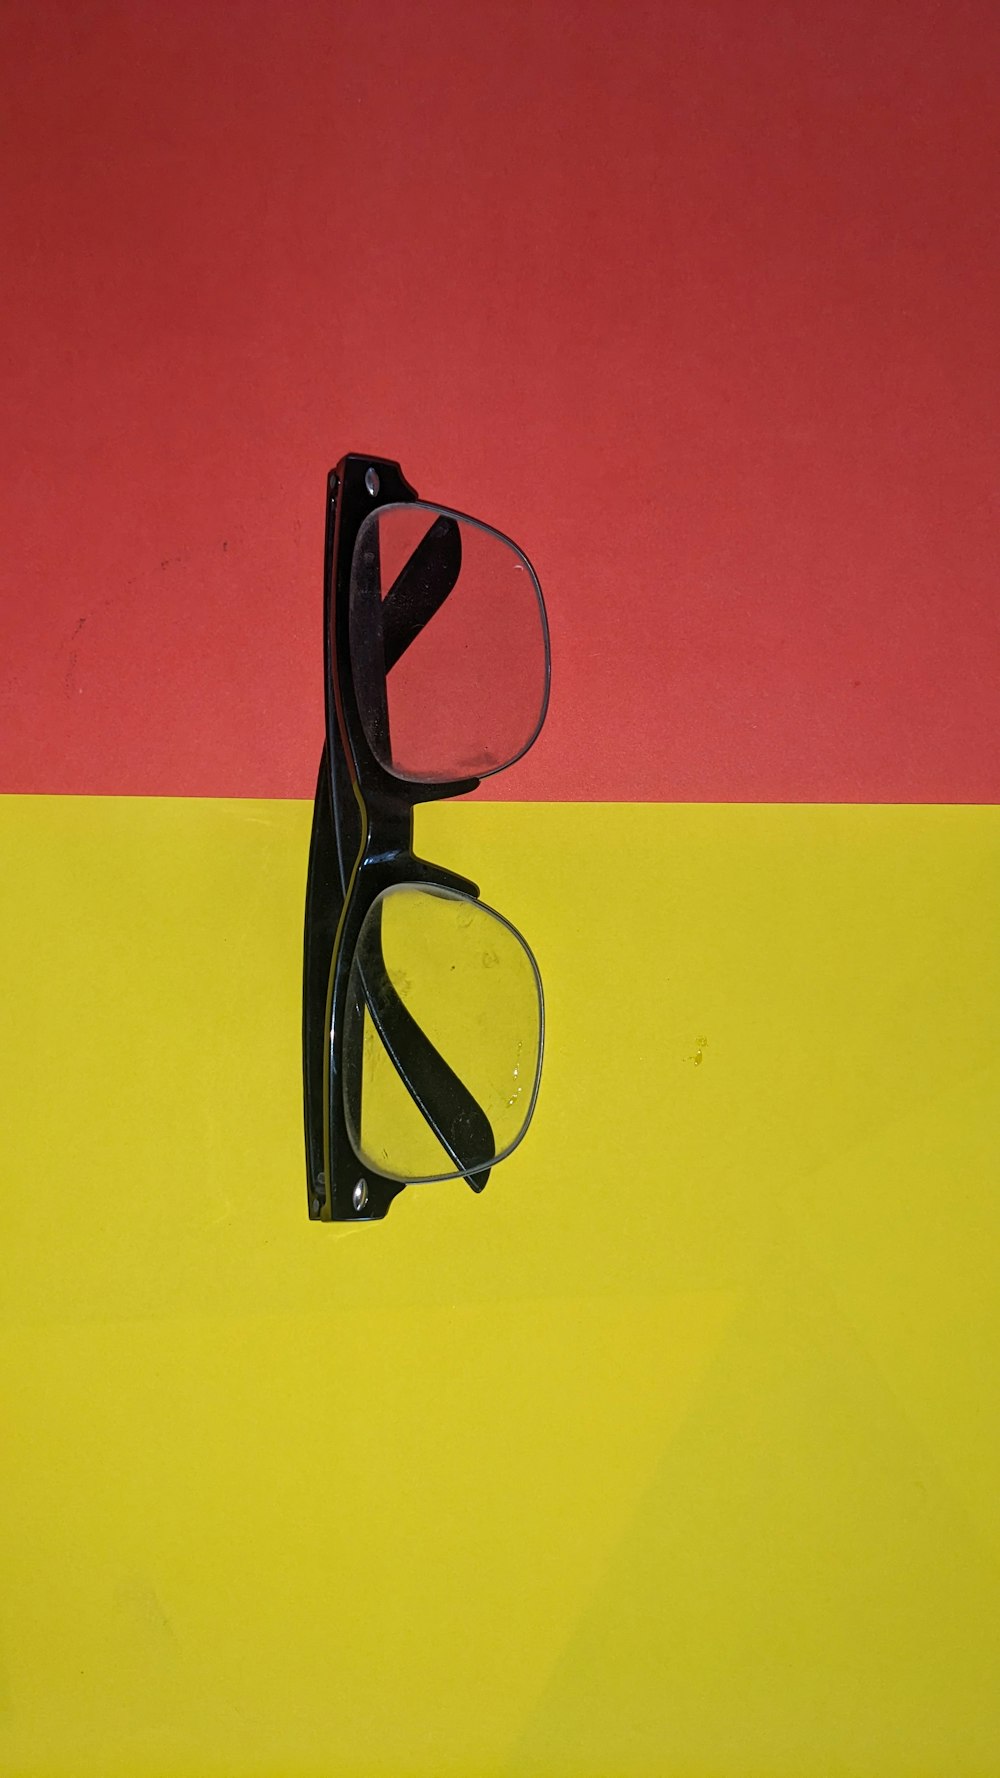 a pair of glasses sitting on top of a yellow and red background